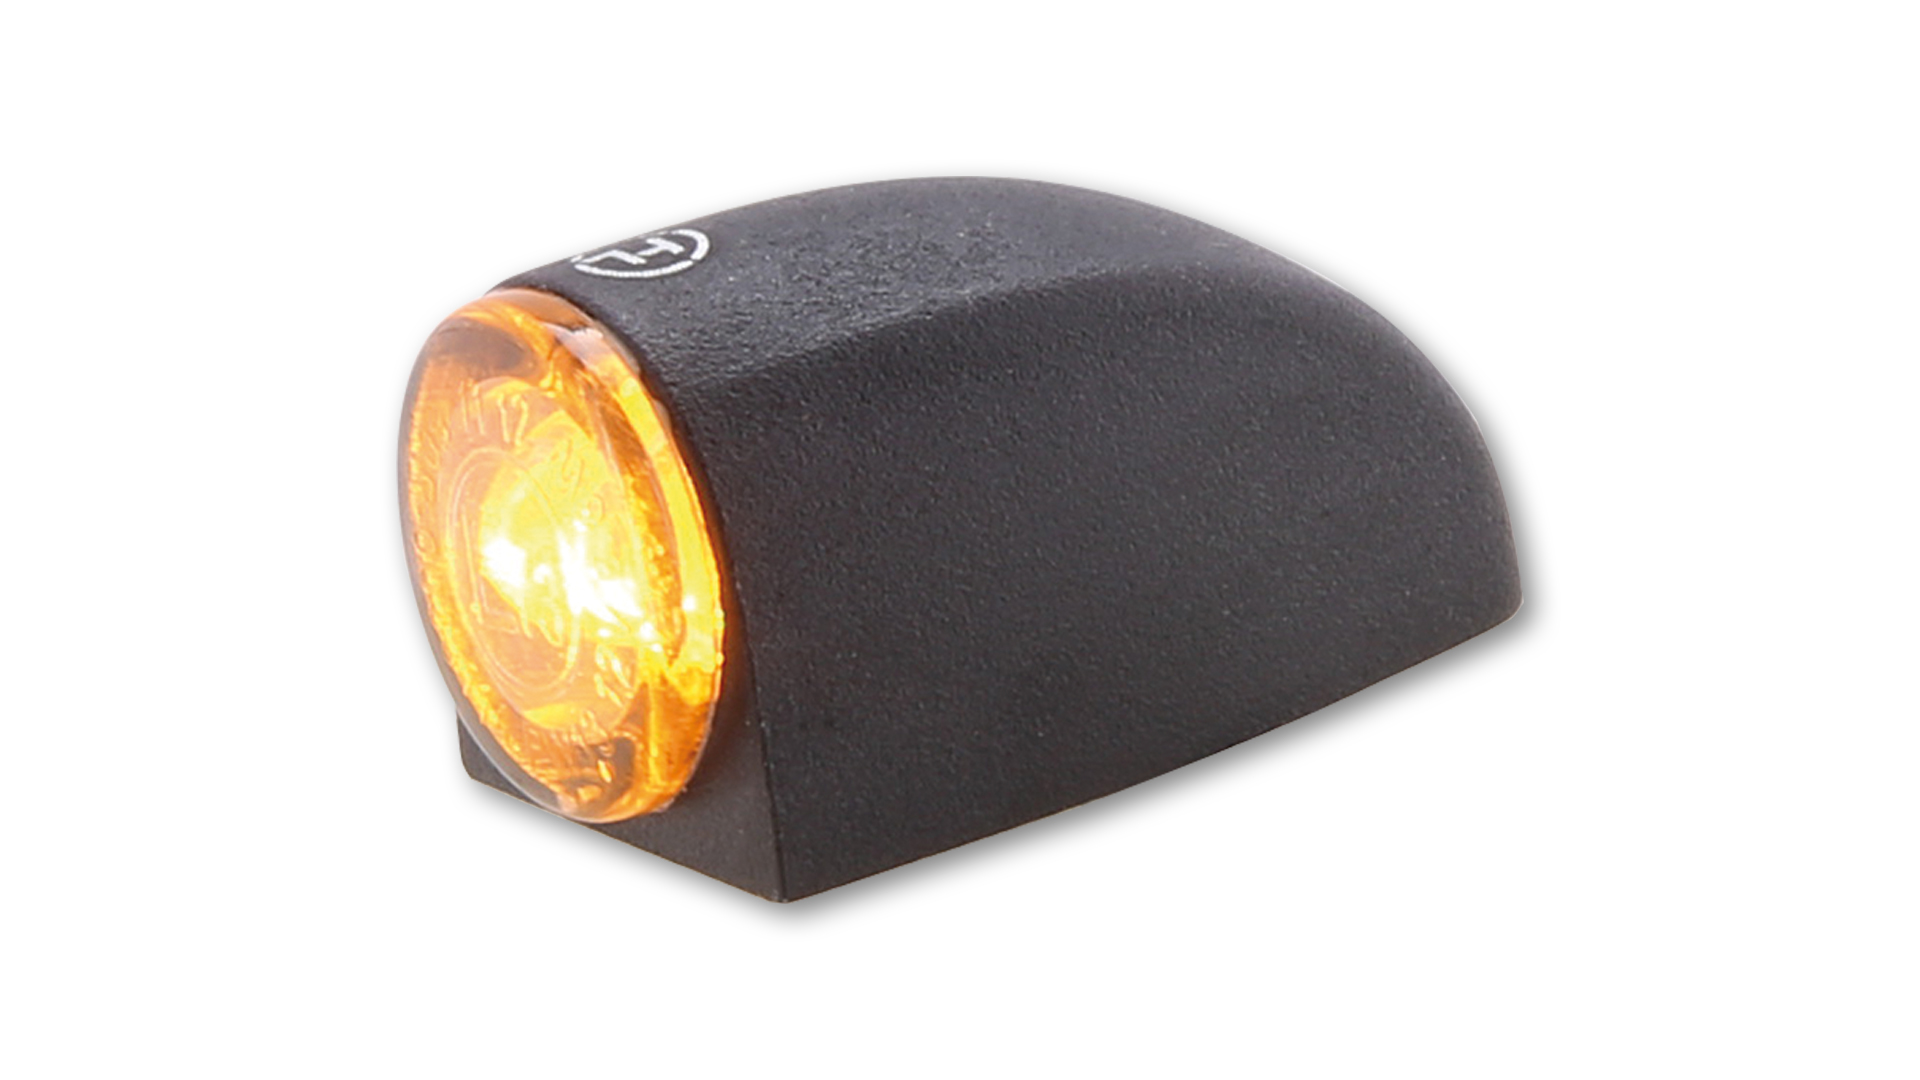 CLIGNOTANT A LEDS - HIGHSIDER - PROTON 2 - LED 3 IN 1 TURNSIGNAL